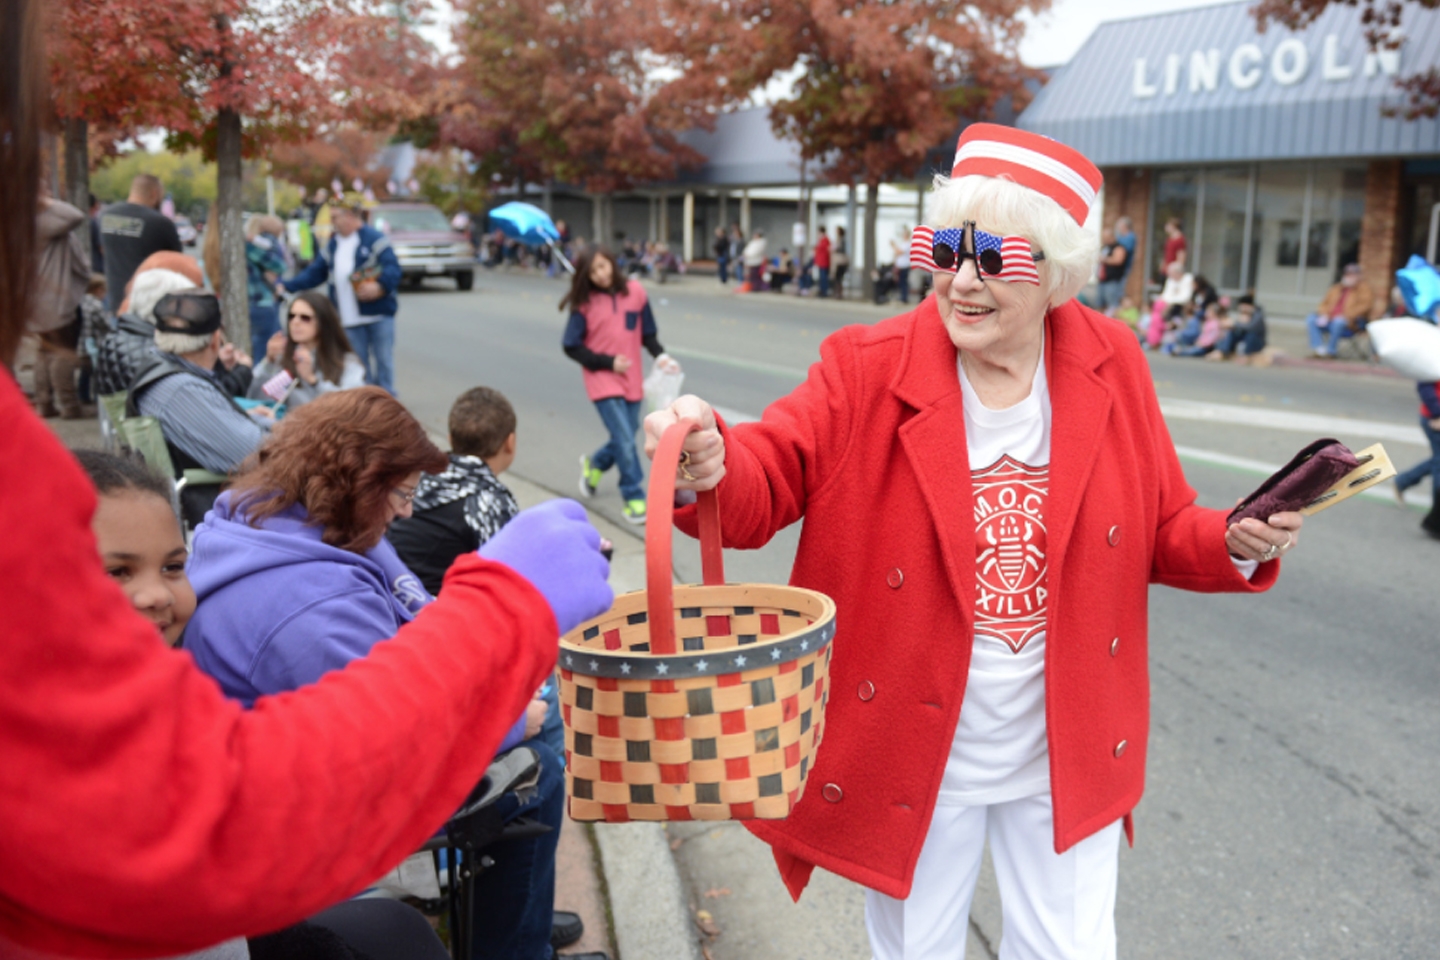 VFW Post 1747 2017/2018 Auxiliary President Sherry Morehouse passes out candy during the 2017 Oroville Veterans Day Parade.